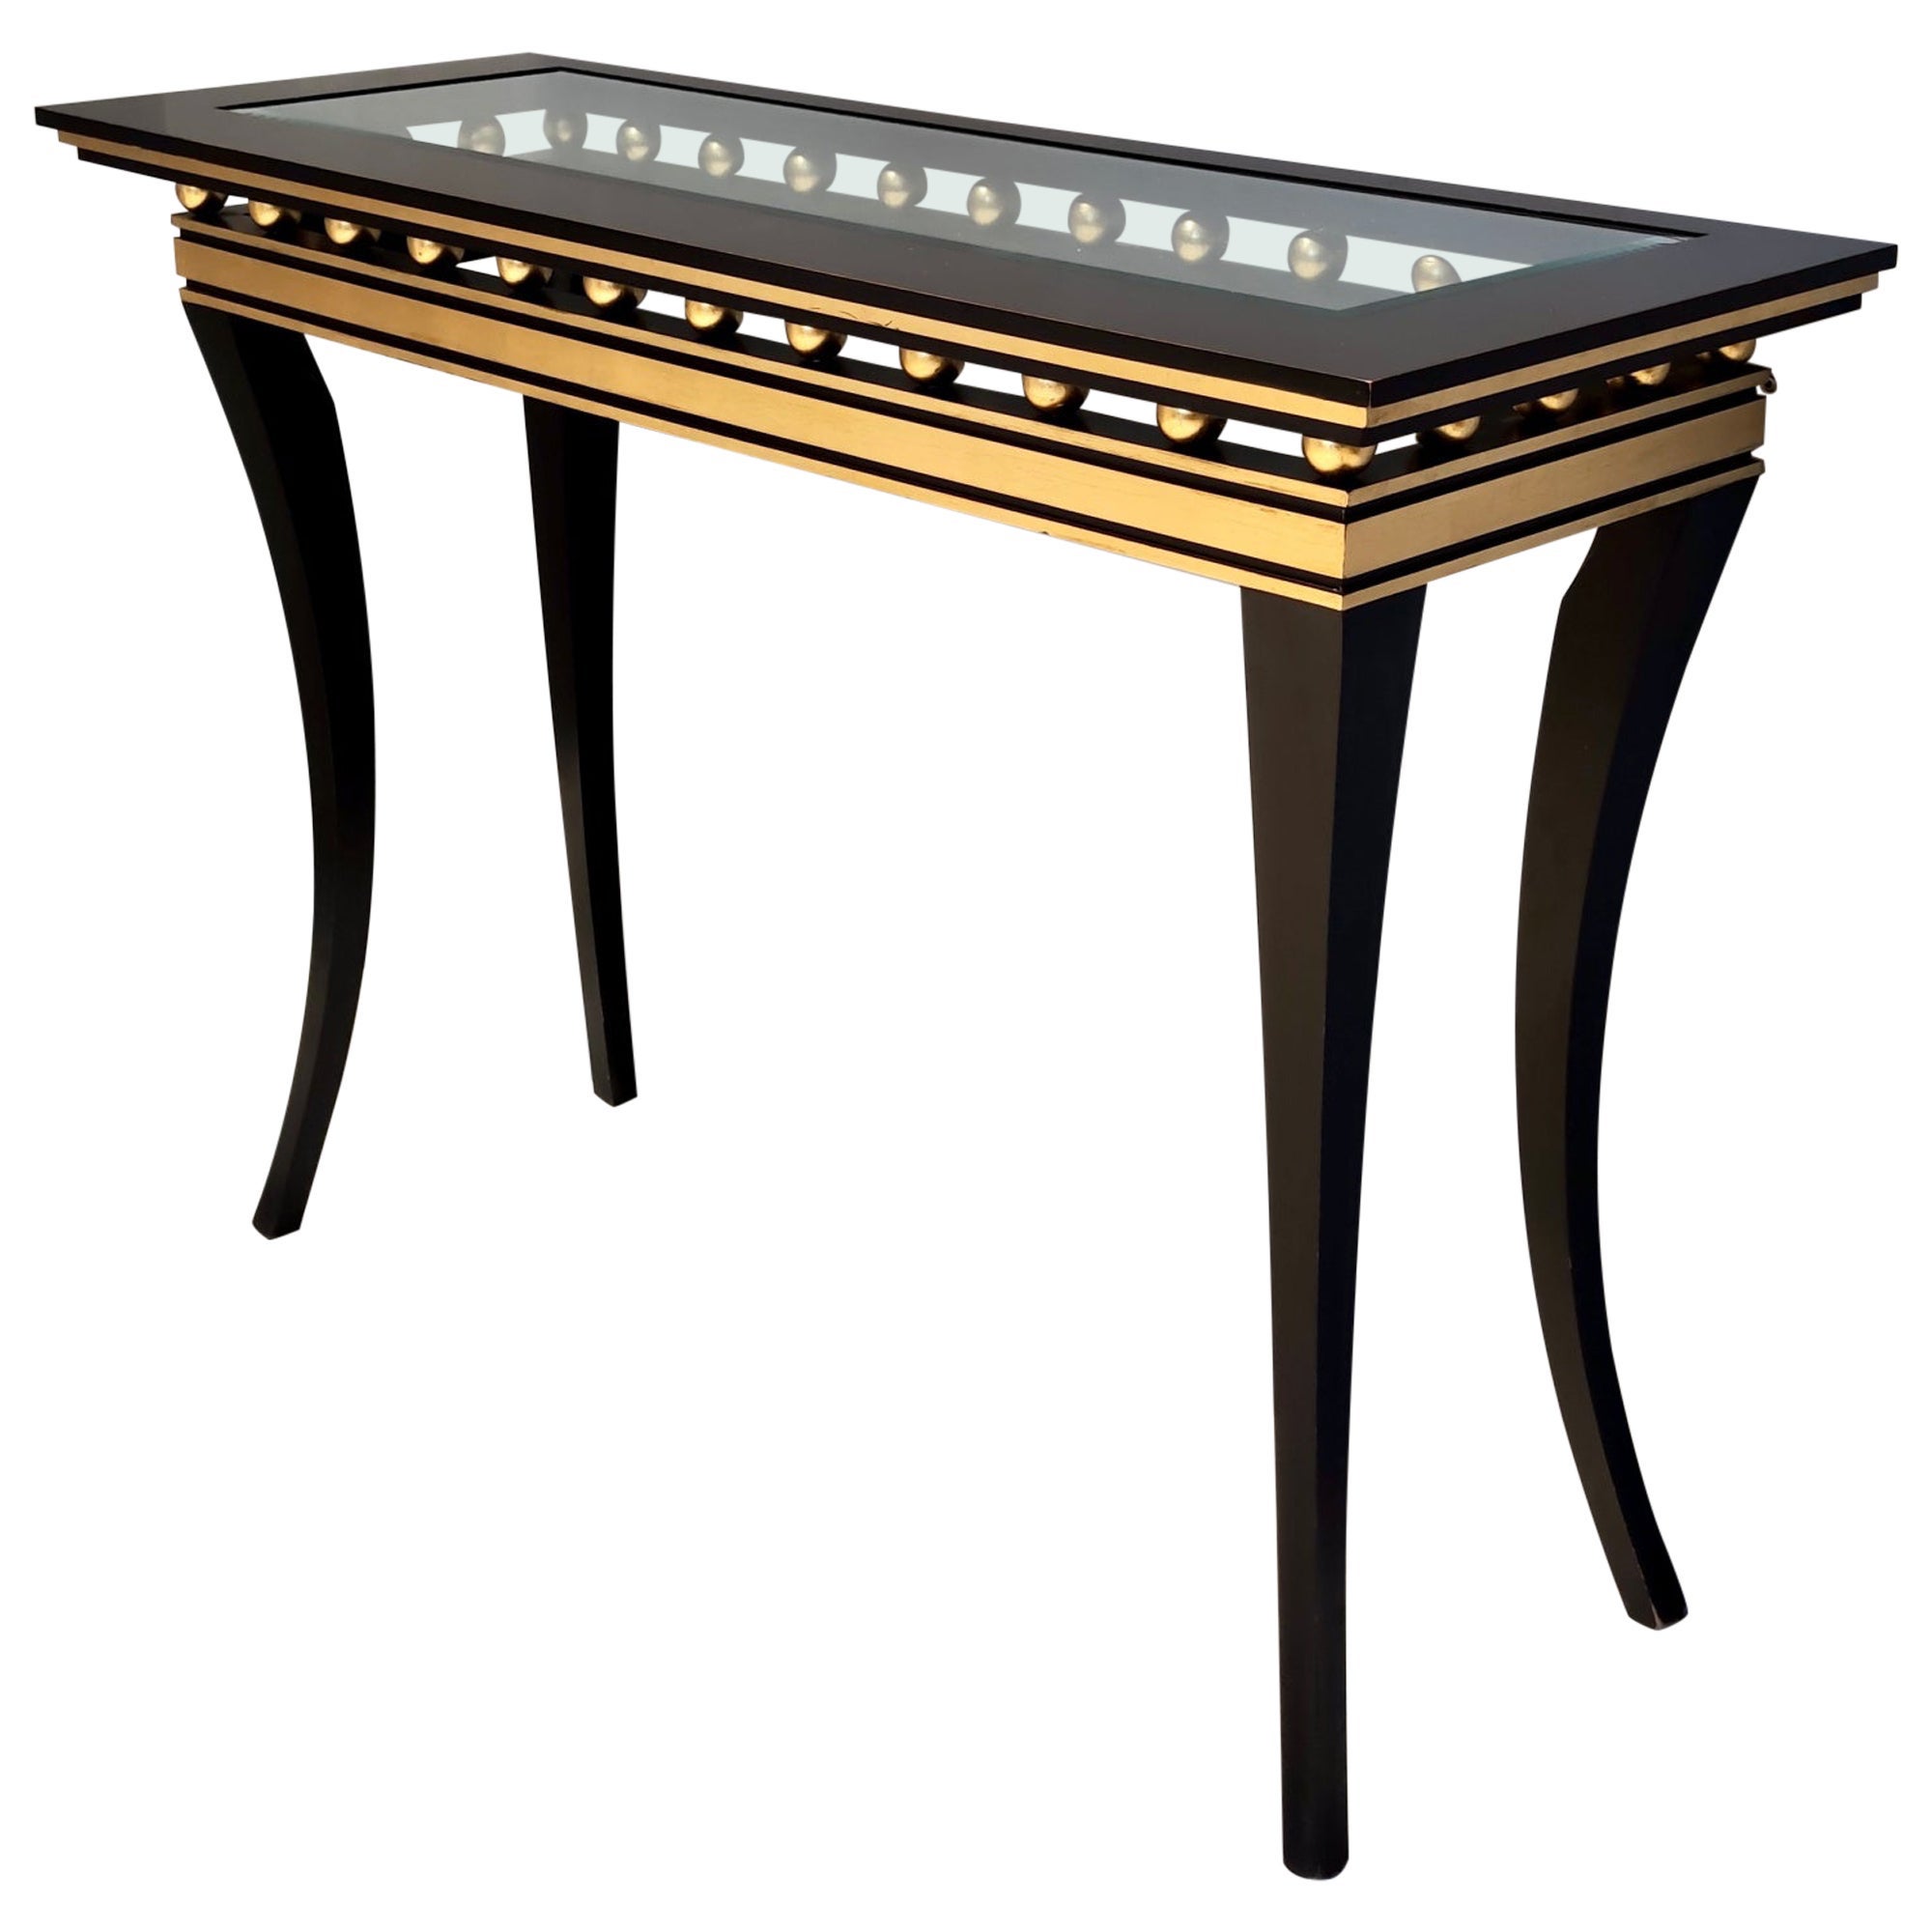 Made in Italy, 2000s.
This console features an ebonized beech frame with golden lacquered details and a rectangular beveled crystal top.
It might show slight traces of use since it's vintage, but it can be considered as in excellent original